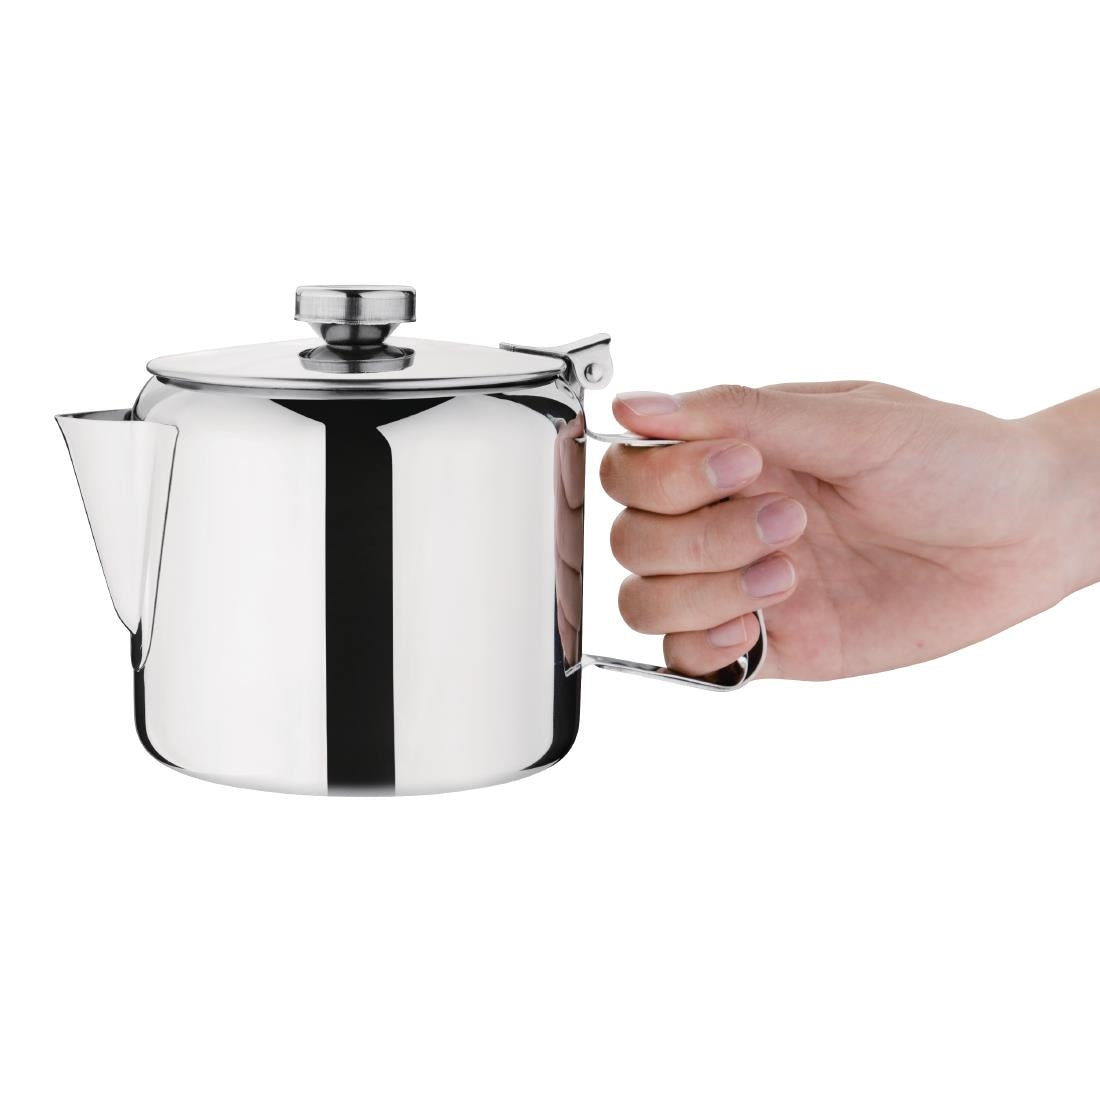 Olympia Concorde Stainless Steel Teapot 850ml